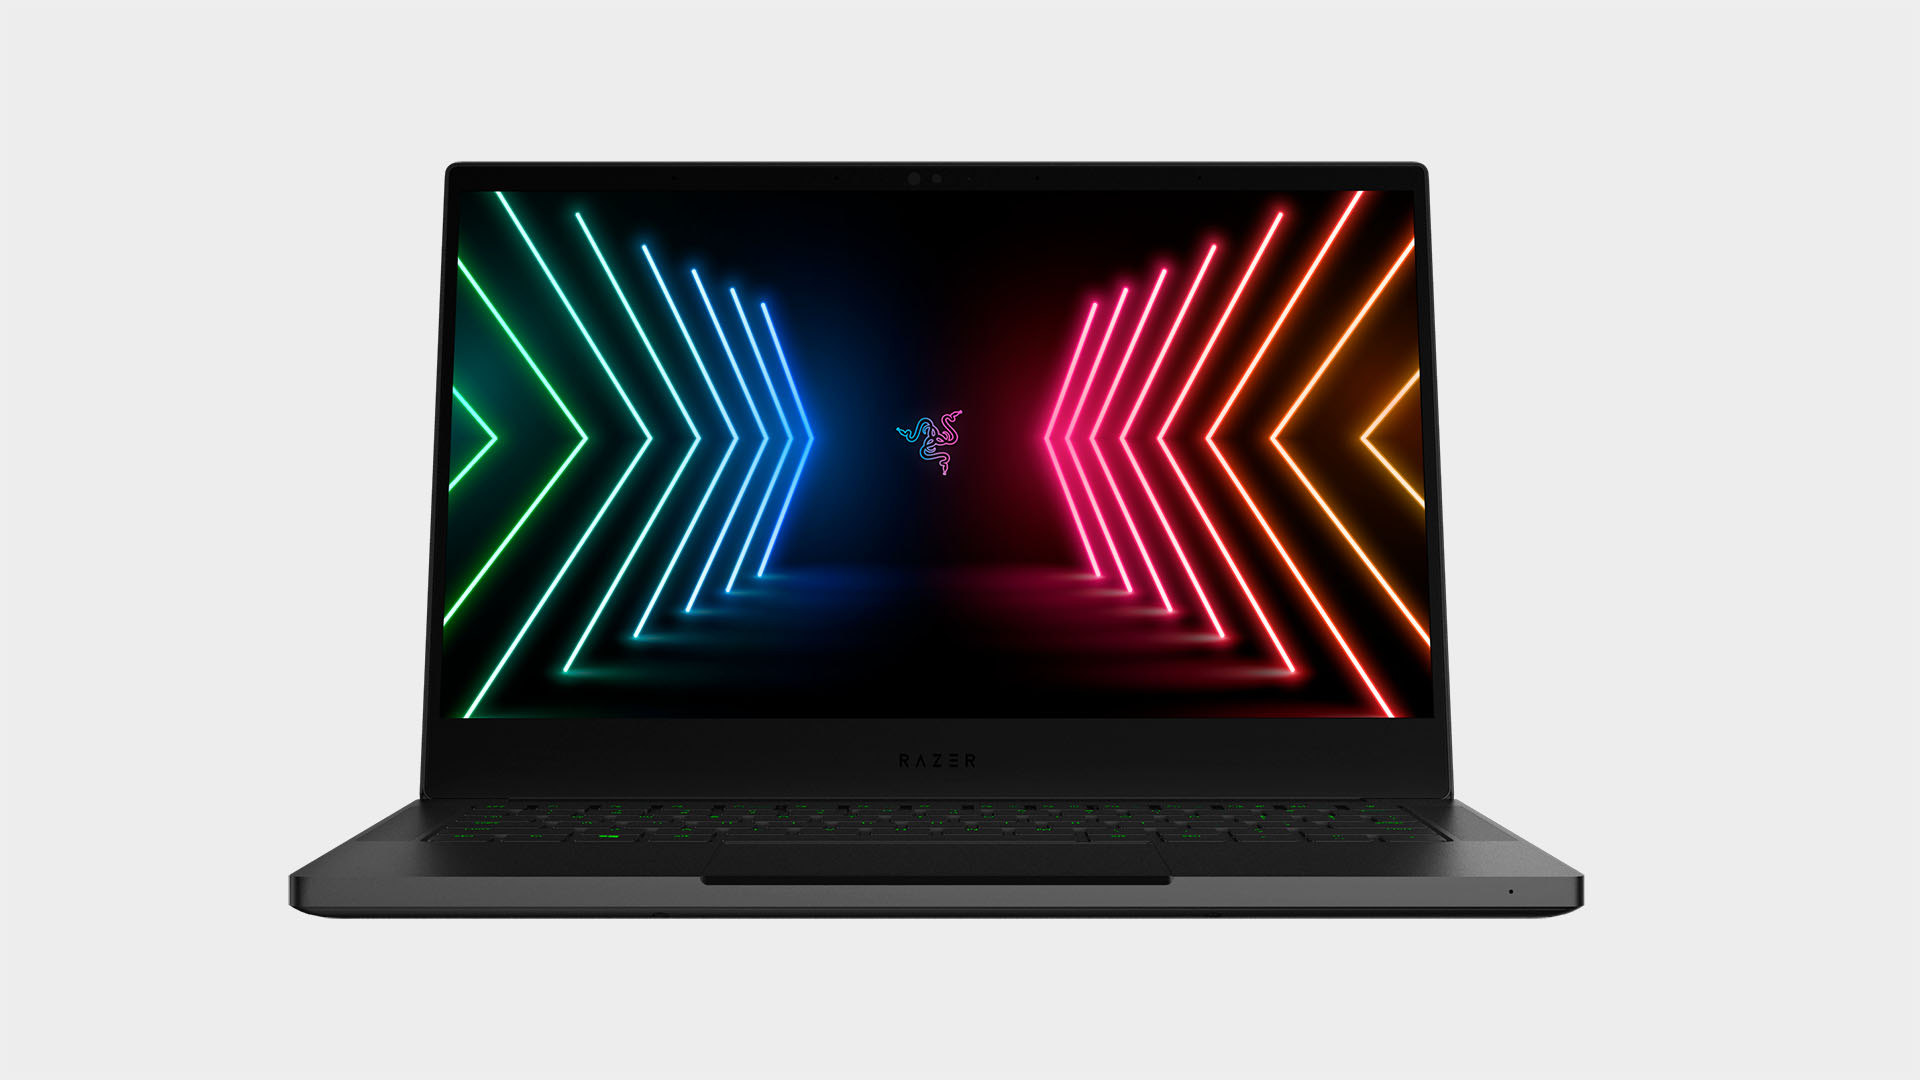  Razer announces new Blade Stealth 13 gaming laptop with Intel Xe and Nvidia GTX graphics 